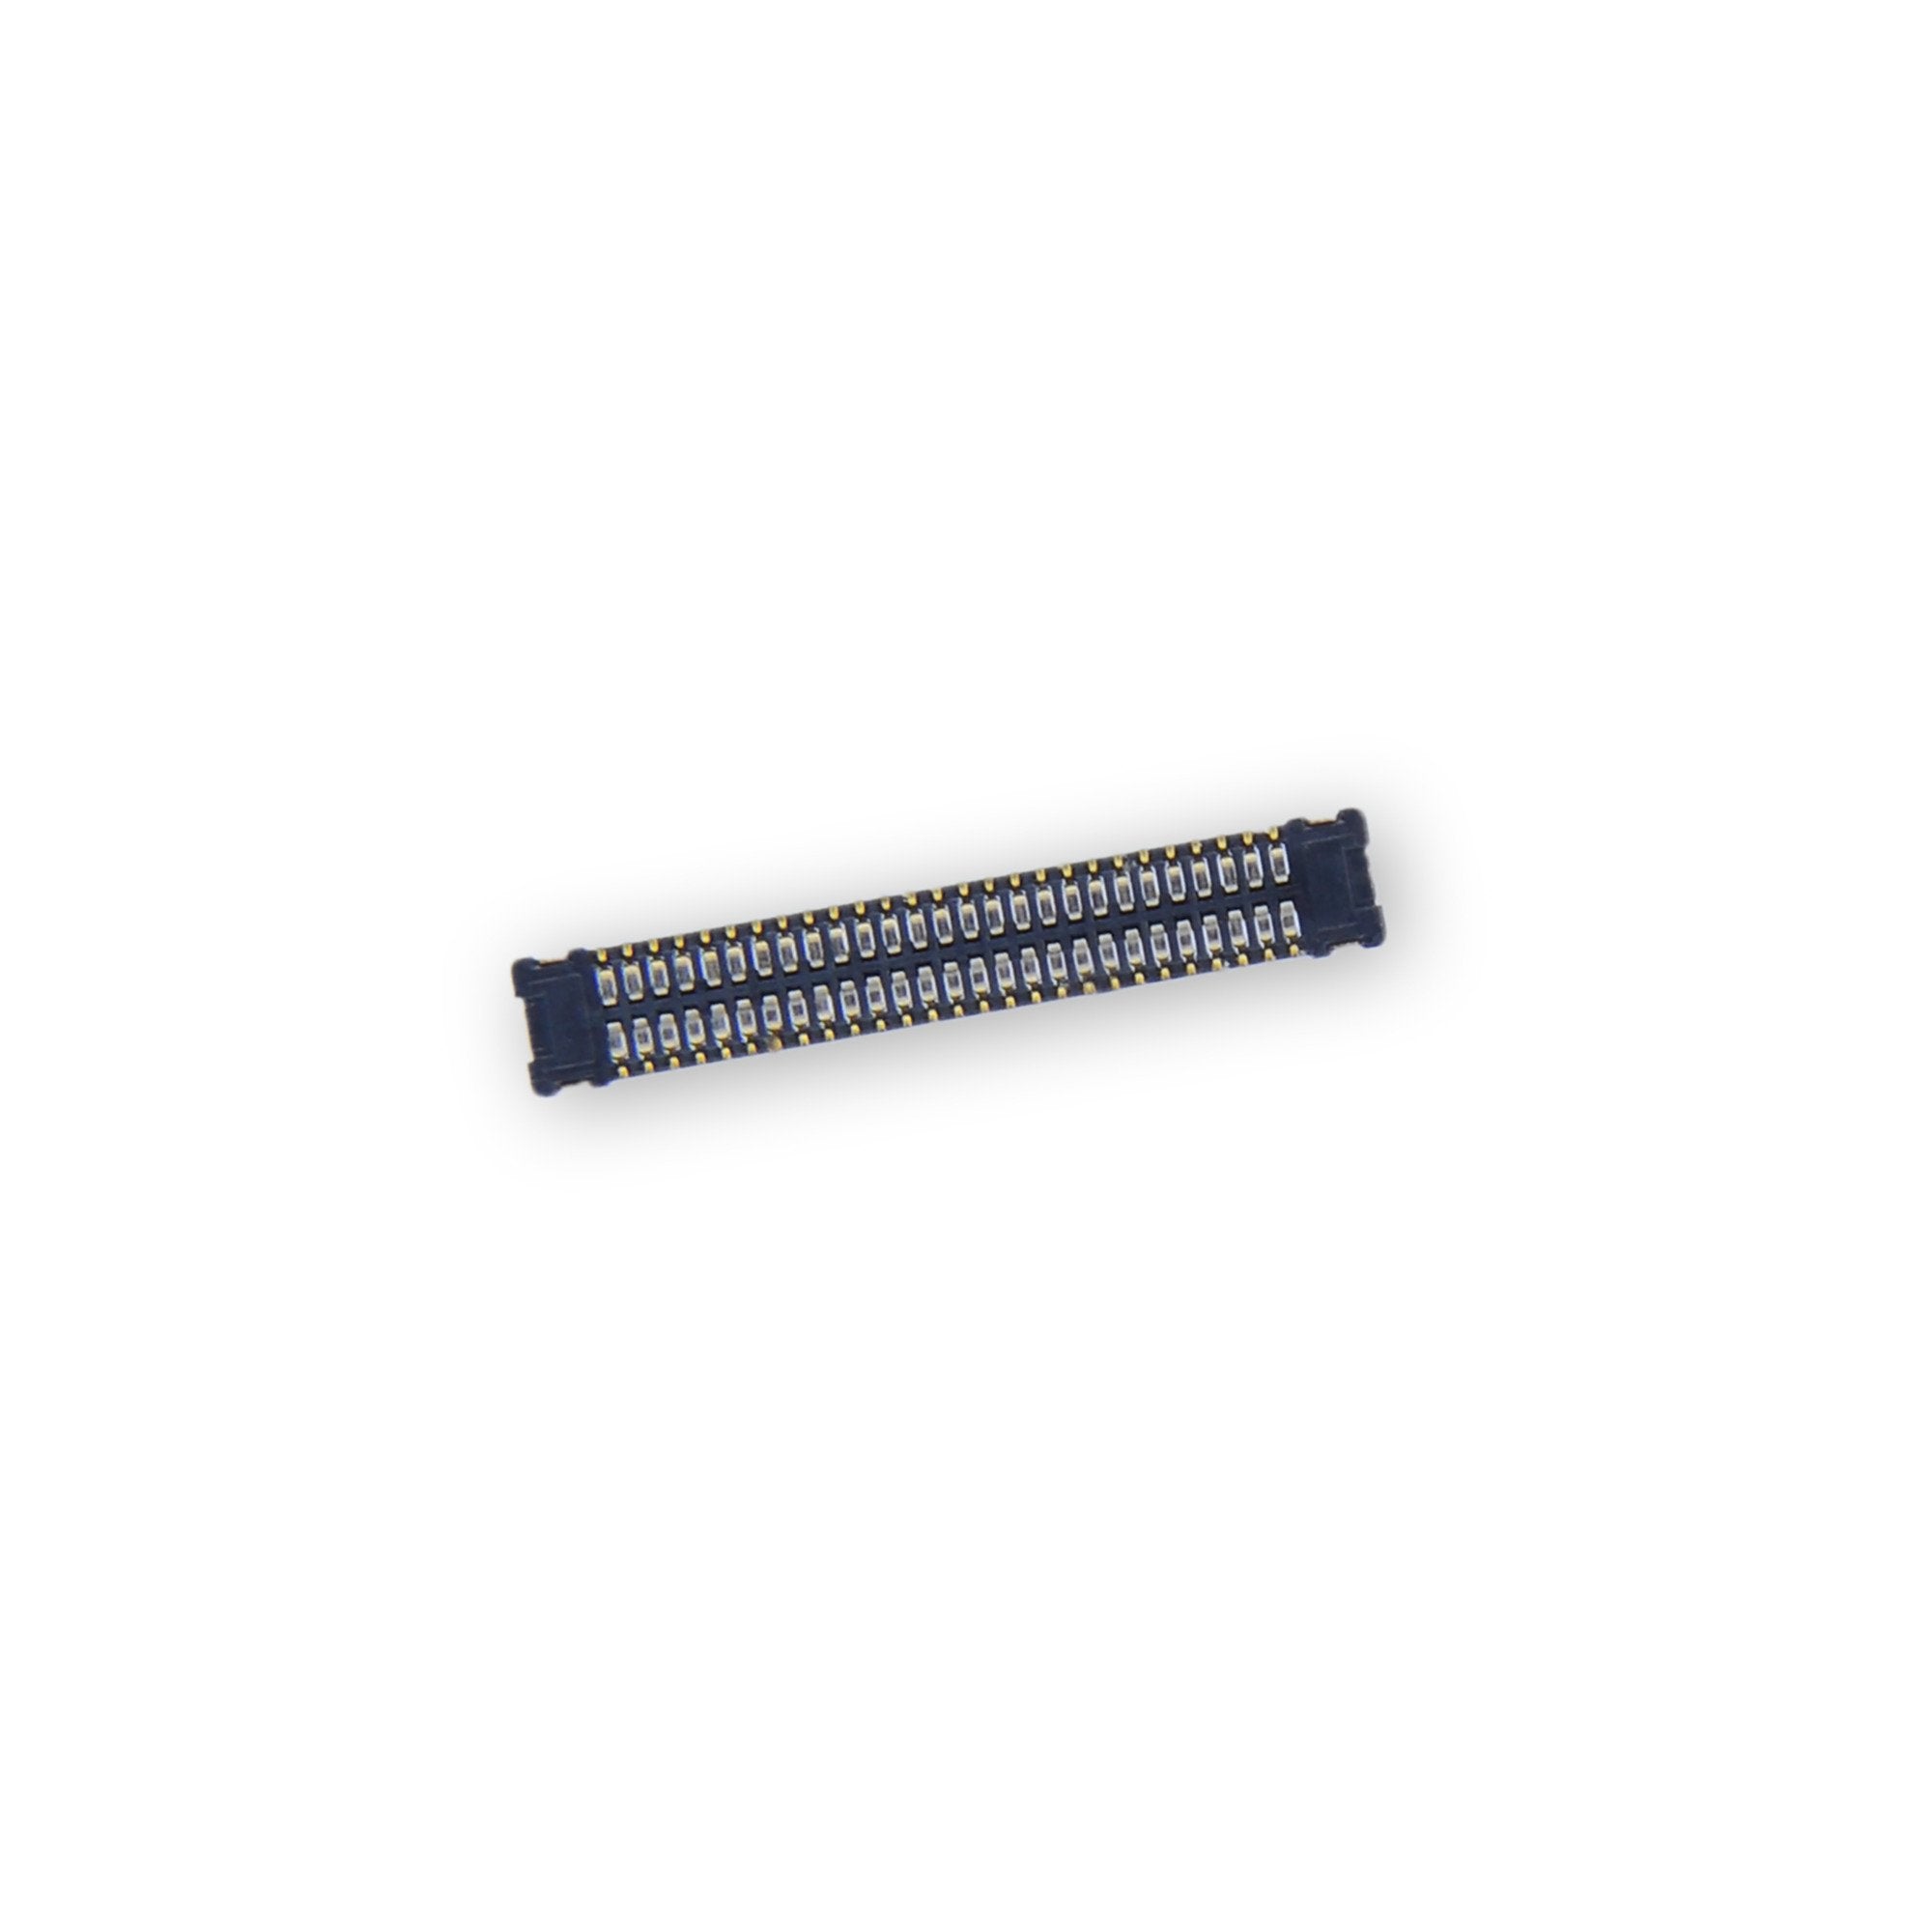 iPhone 6s Plus LCD/Digitizer FPC Connector (J4200)